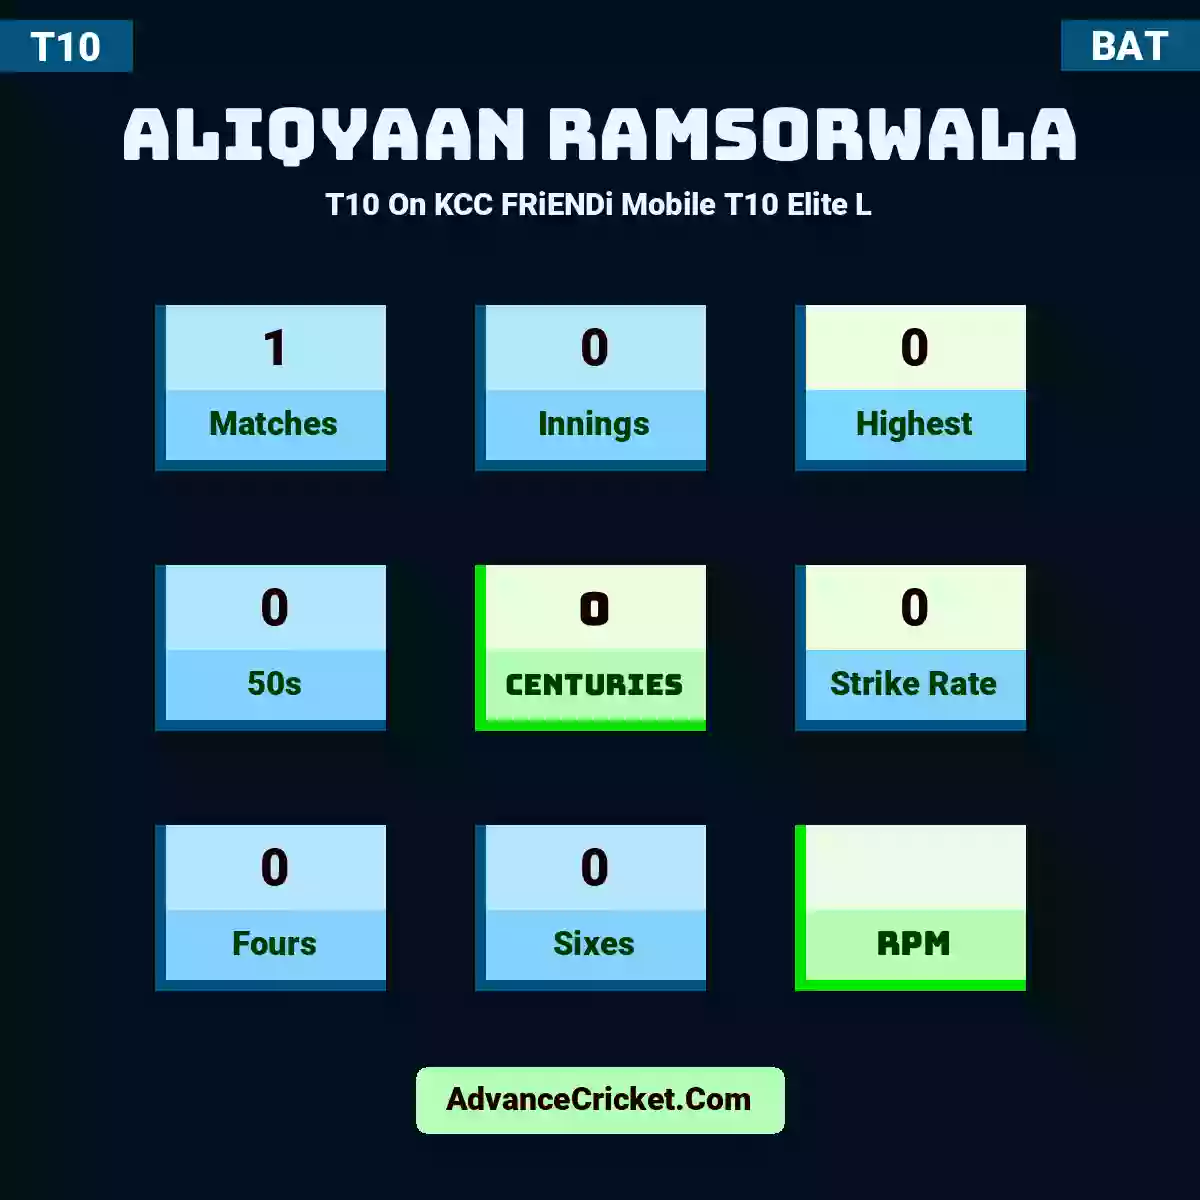 Aliqyaan Ramsorwala T10  On KCC FRiENDi Mobile T10 Elite L, Aliqyaan Ramsorwala played 1 matches, scored 0 runs as highest, 0 half-centuries, and 0 centuries, with a strike rate of 0. A.Ramsorwala hit 0 fours and 0 sixes.